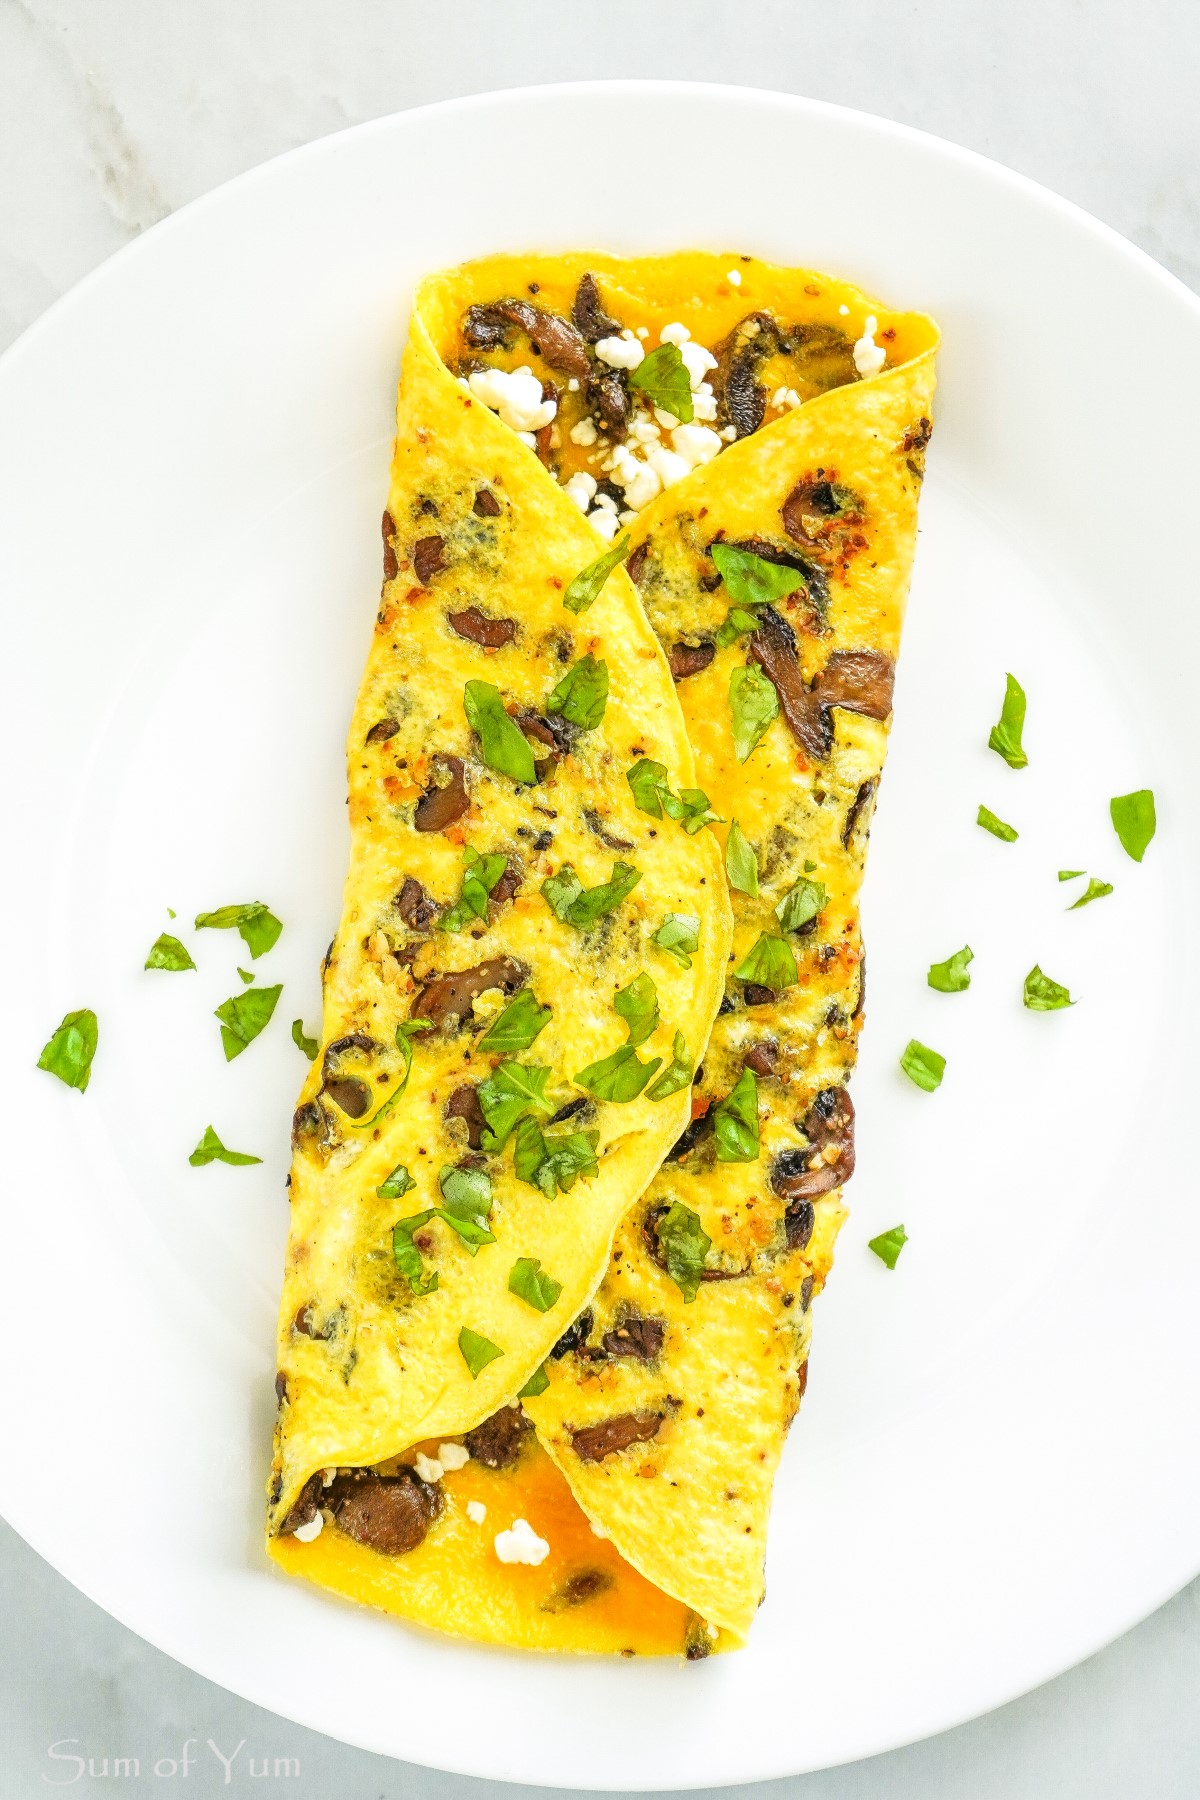 Mushroom Omelette with Goat Cheese